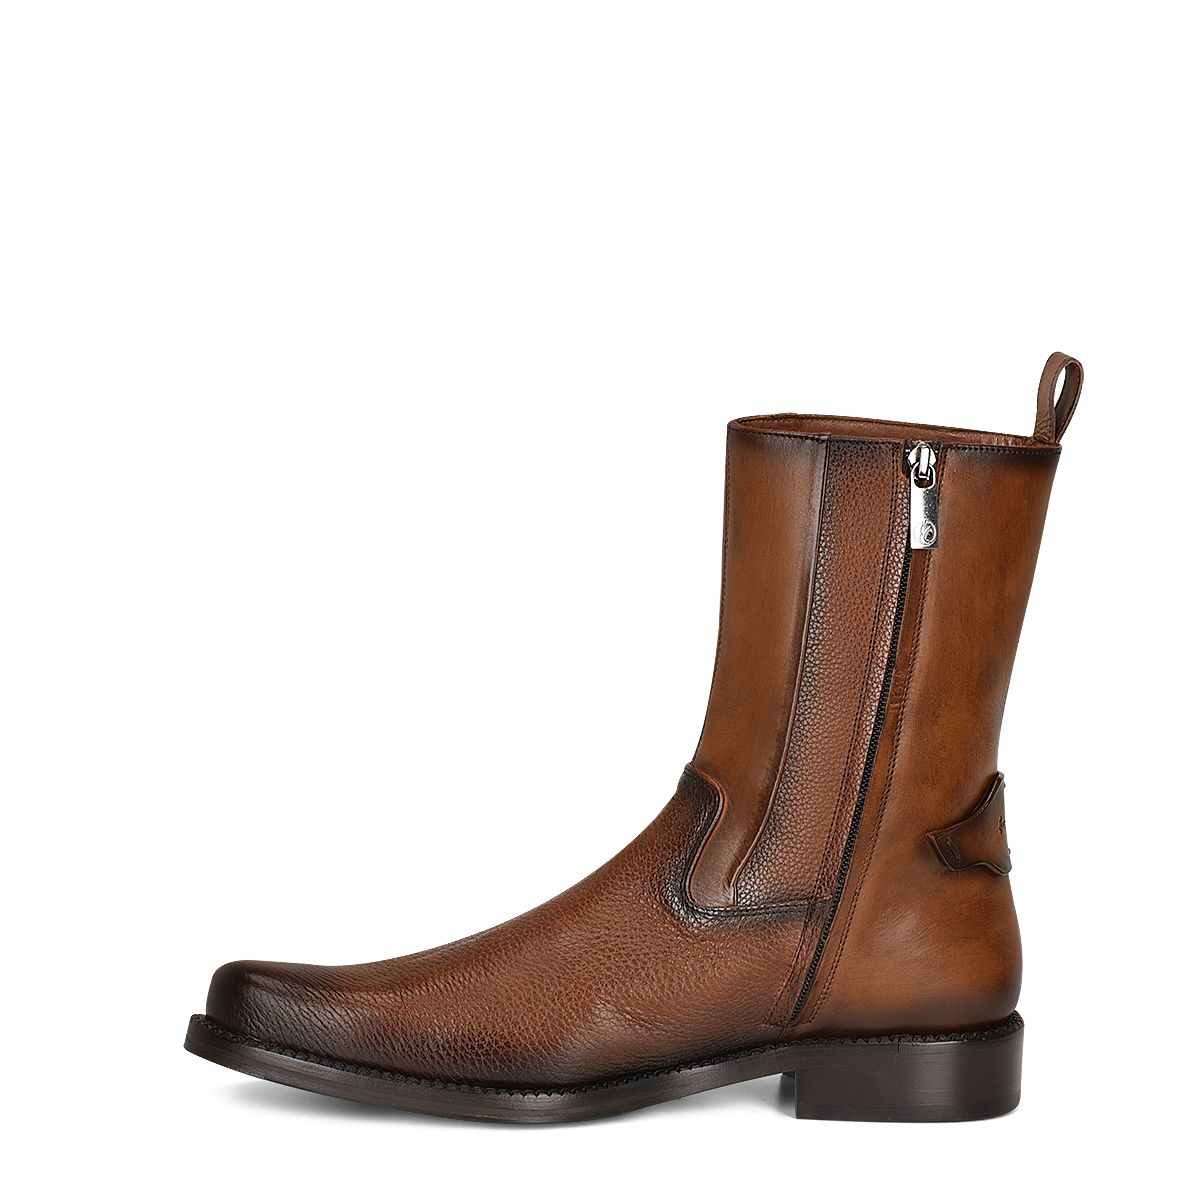 828VNTV - Franco Cuadra brown dress casual leather zip ankle boots for men-Kuet.us